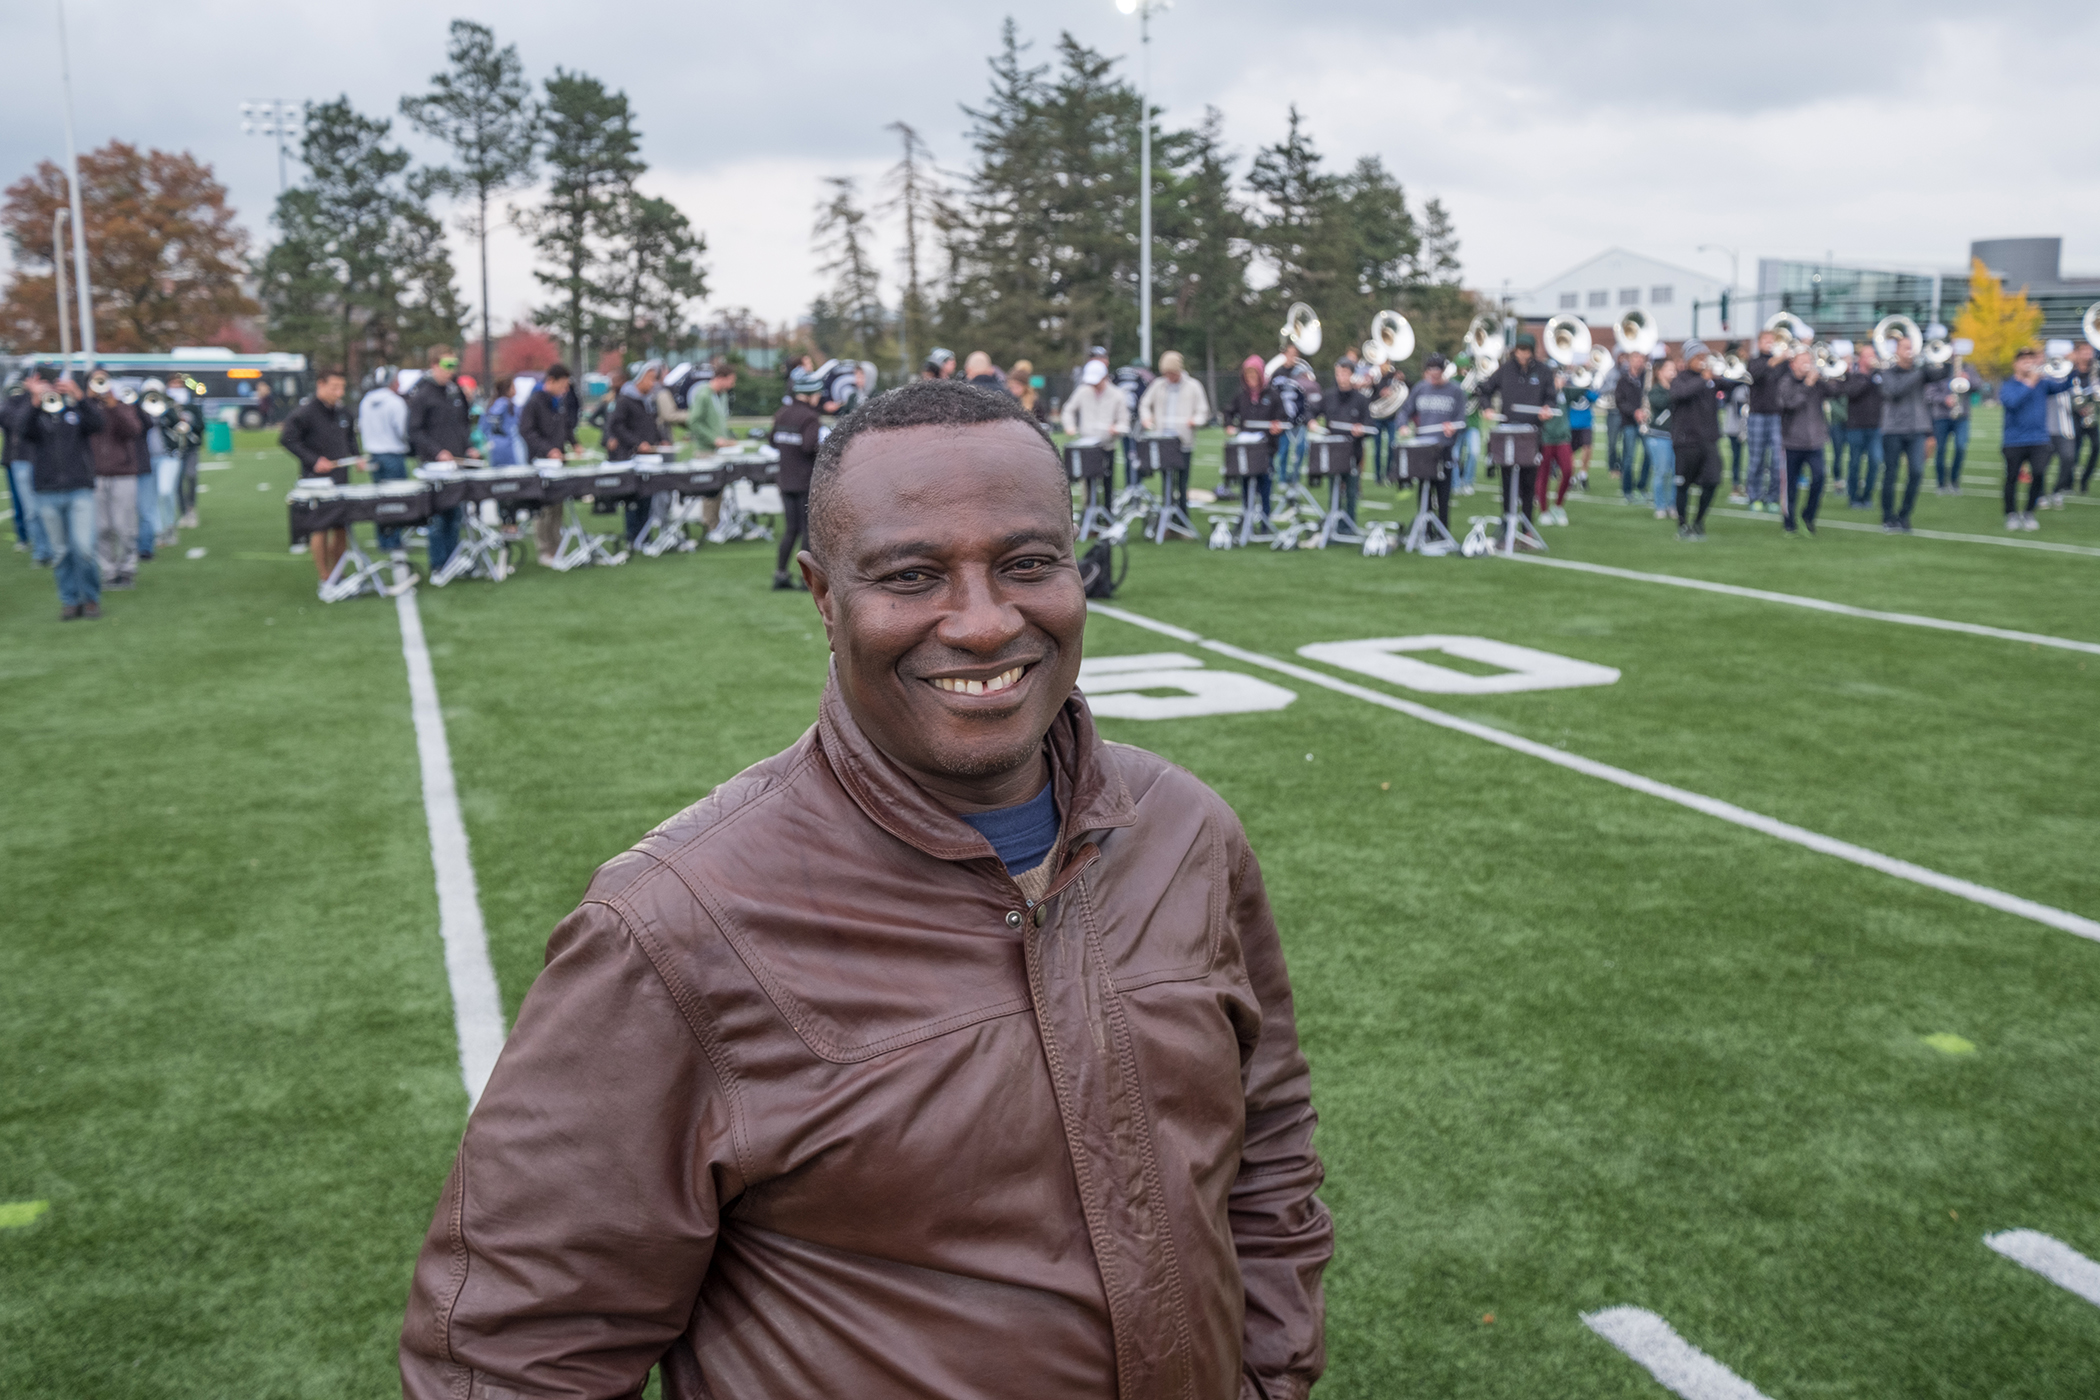 Photo of Ben Ayettey smiling at the camera on a green field, with band members practicing behind him.